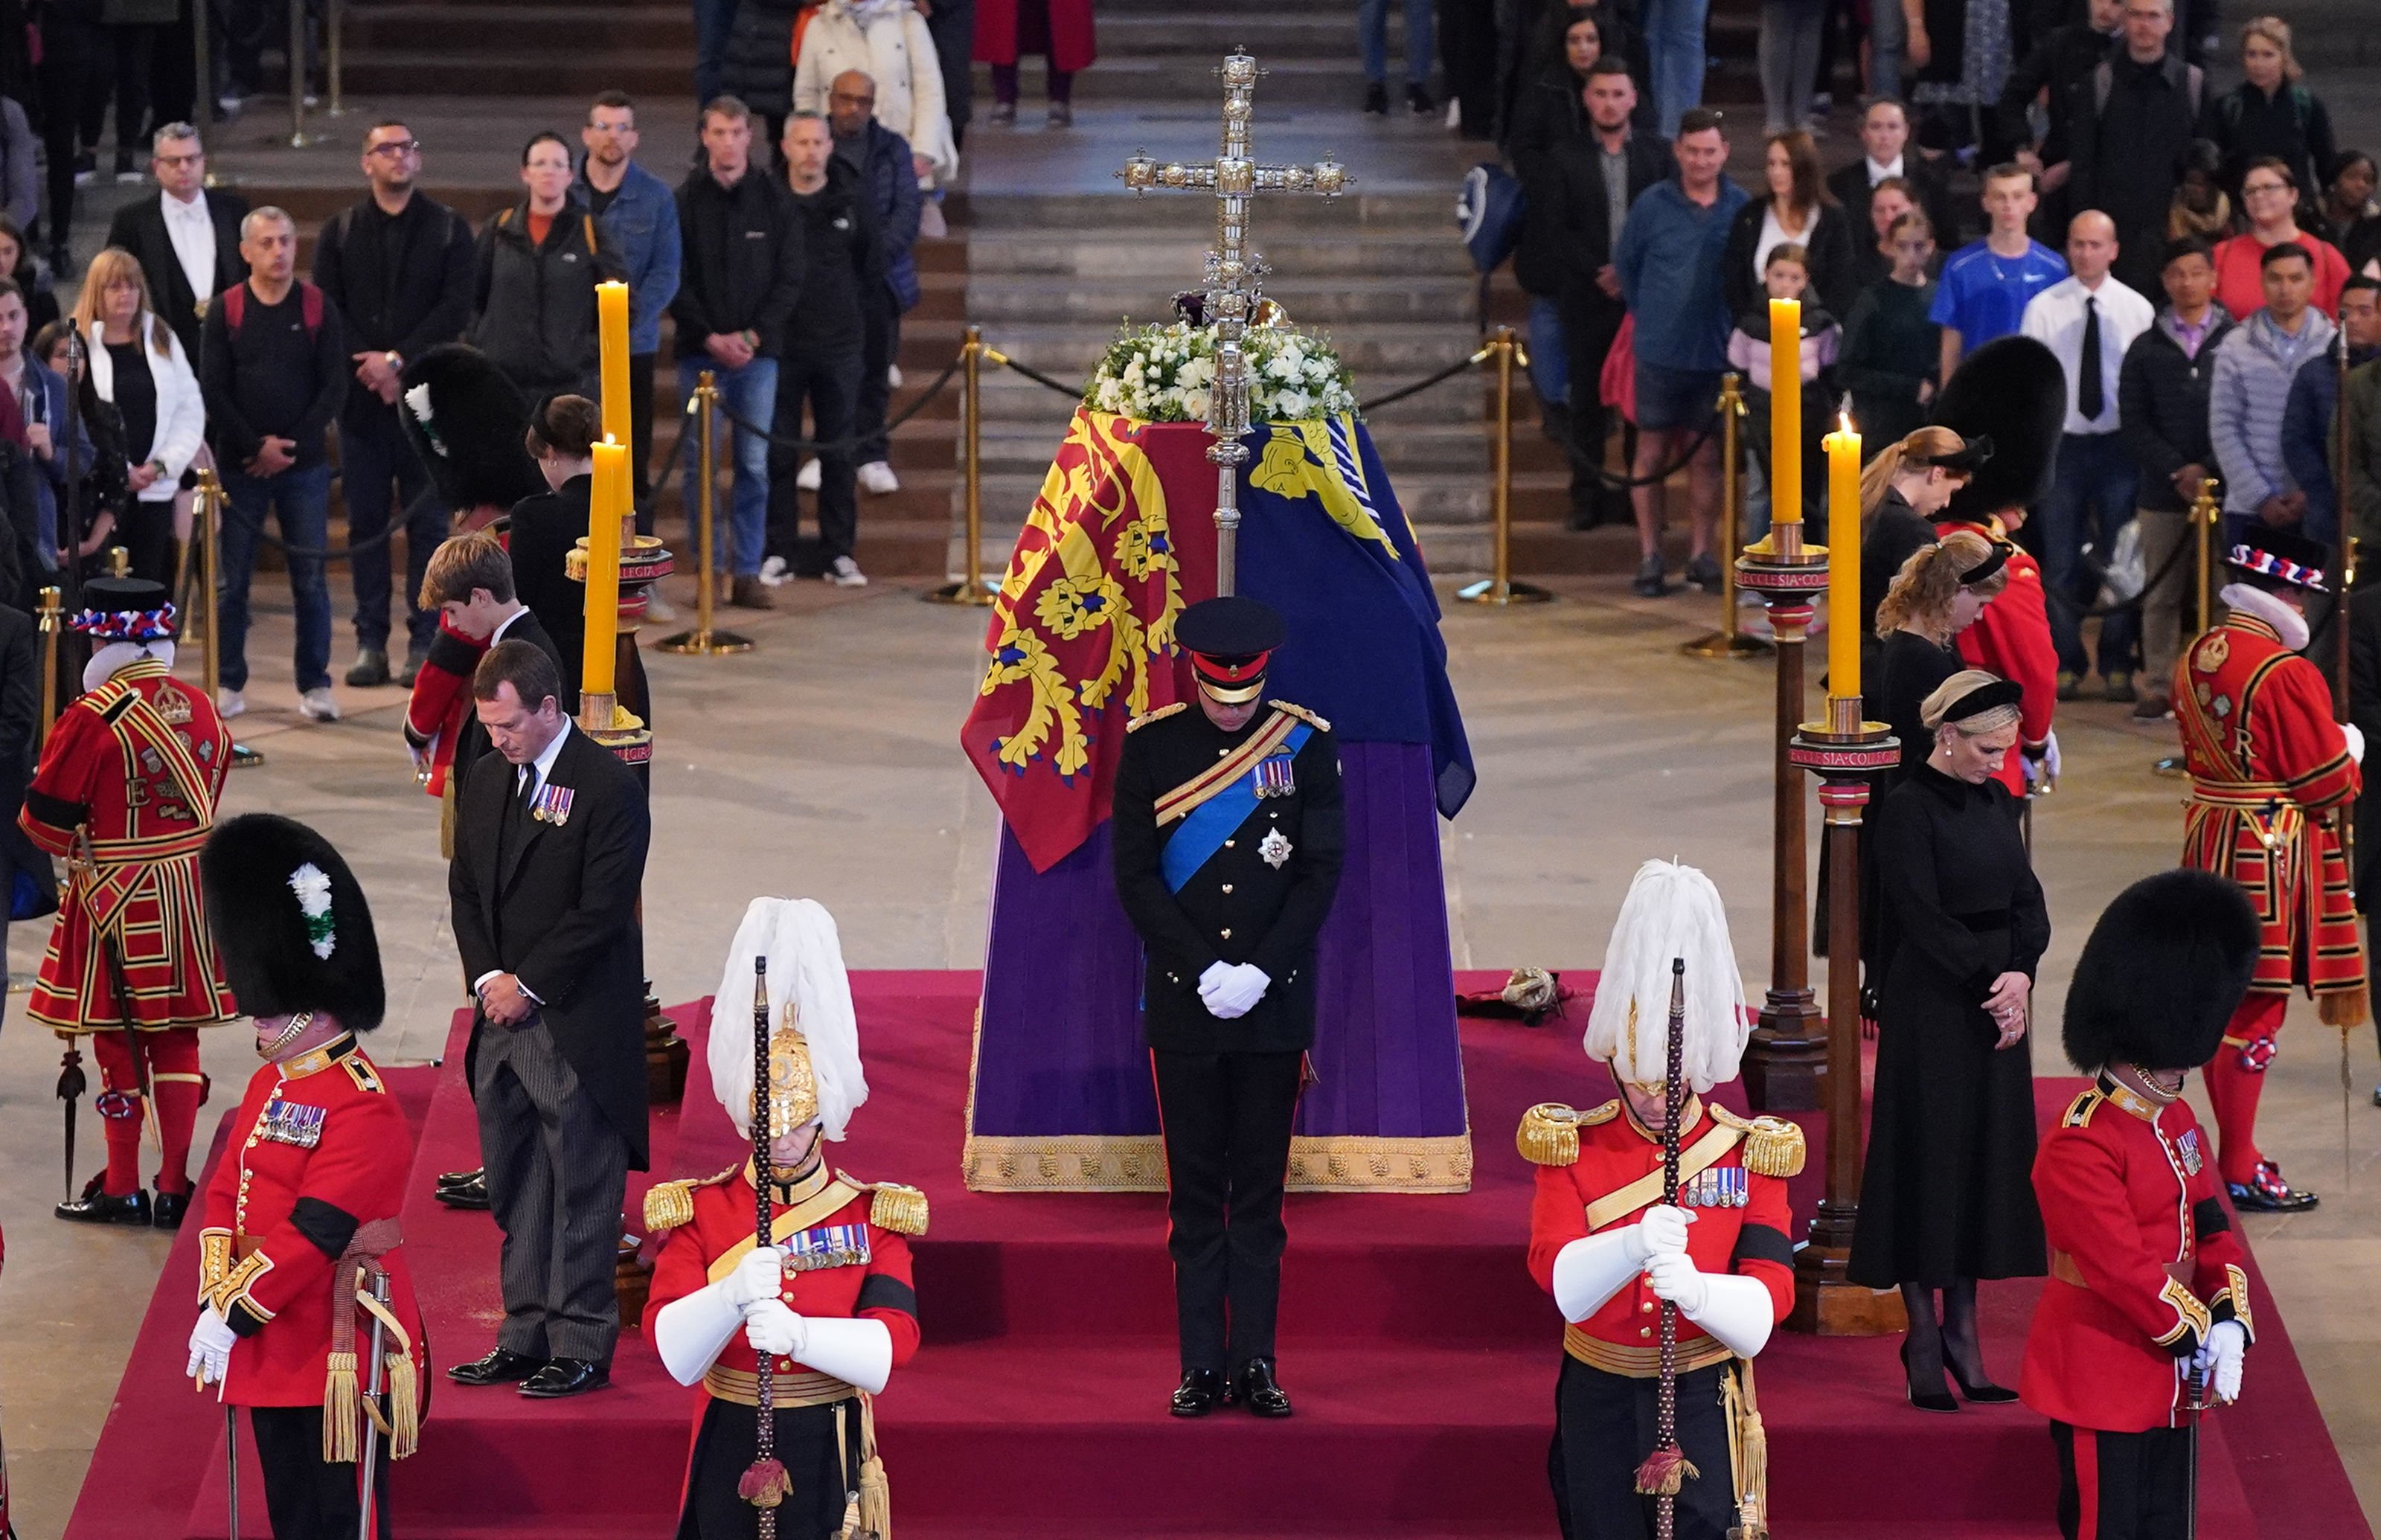 Prince William, Prince Harry, Duke of Sussex, (obscured) Princess Eugenie, Princess Beatrice, Peter Phillips, Zara Tindall, Lady Louise Windsor, James, Viscount Severn hold a vigil in honor of Queen Elizabeth II at Westminster Hall on September 17, 2022 in London, England | Source: Getty Images